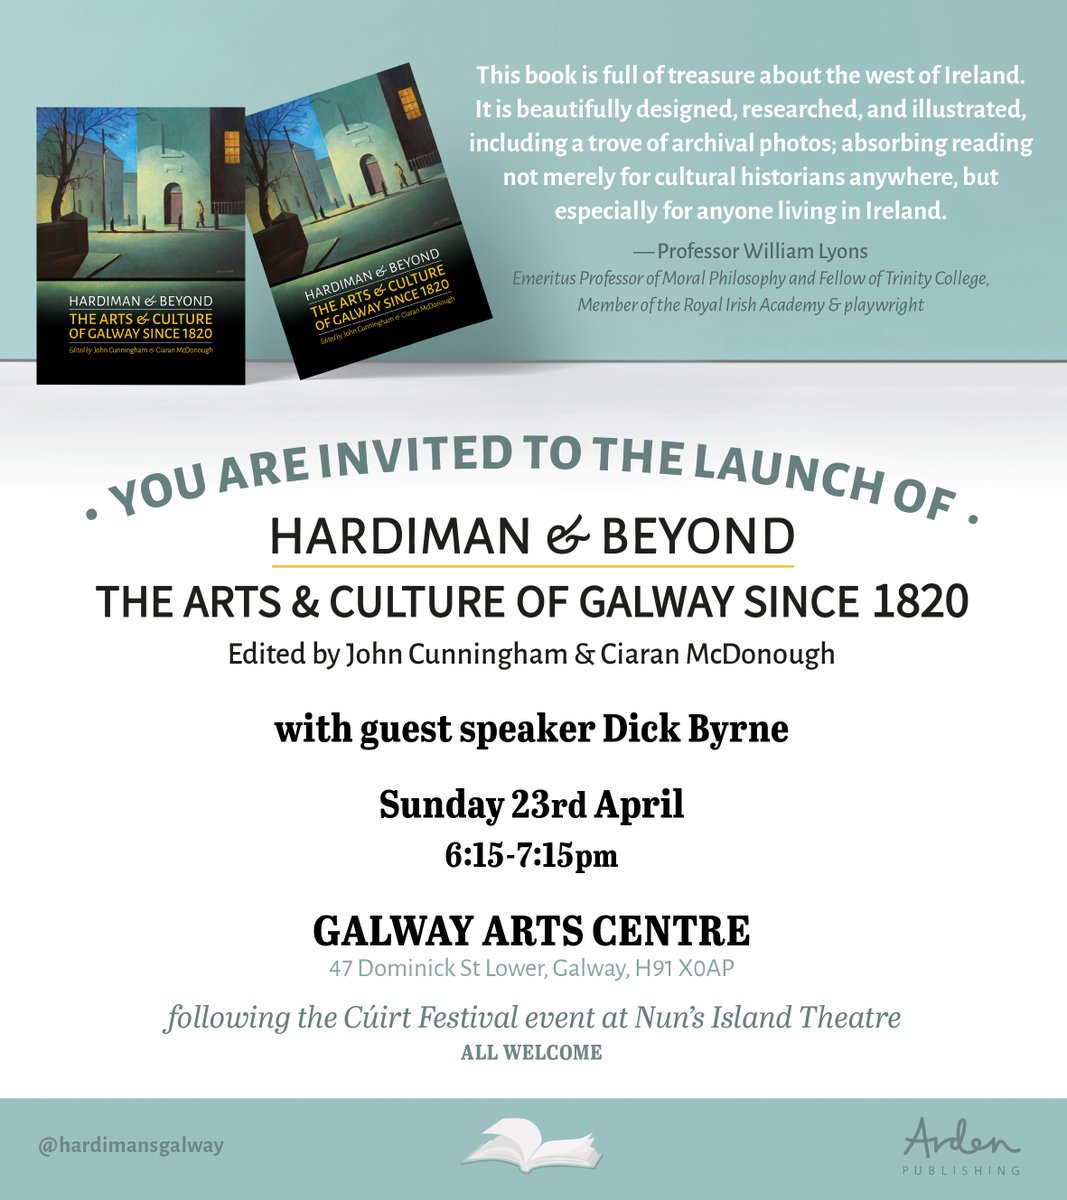 A date for your diaries: Invitation to the launch of the new book, Hardiman and Beyond: The Arts and Culture of Galway Since 1820 (edited by @johncun1ngham & @metamedievalist), which takes place next Sunday evening, 23 April, at 6.15pm. Details in the flyer below.